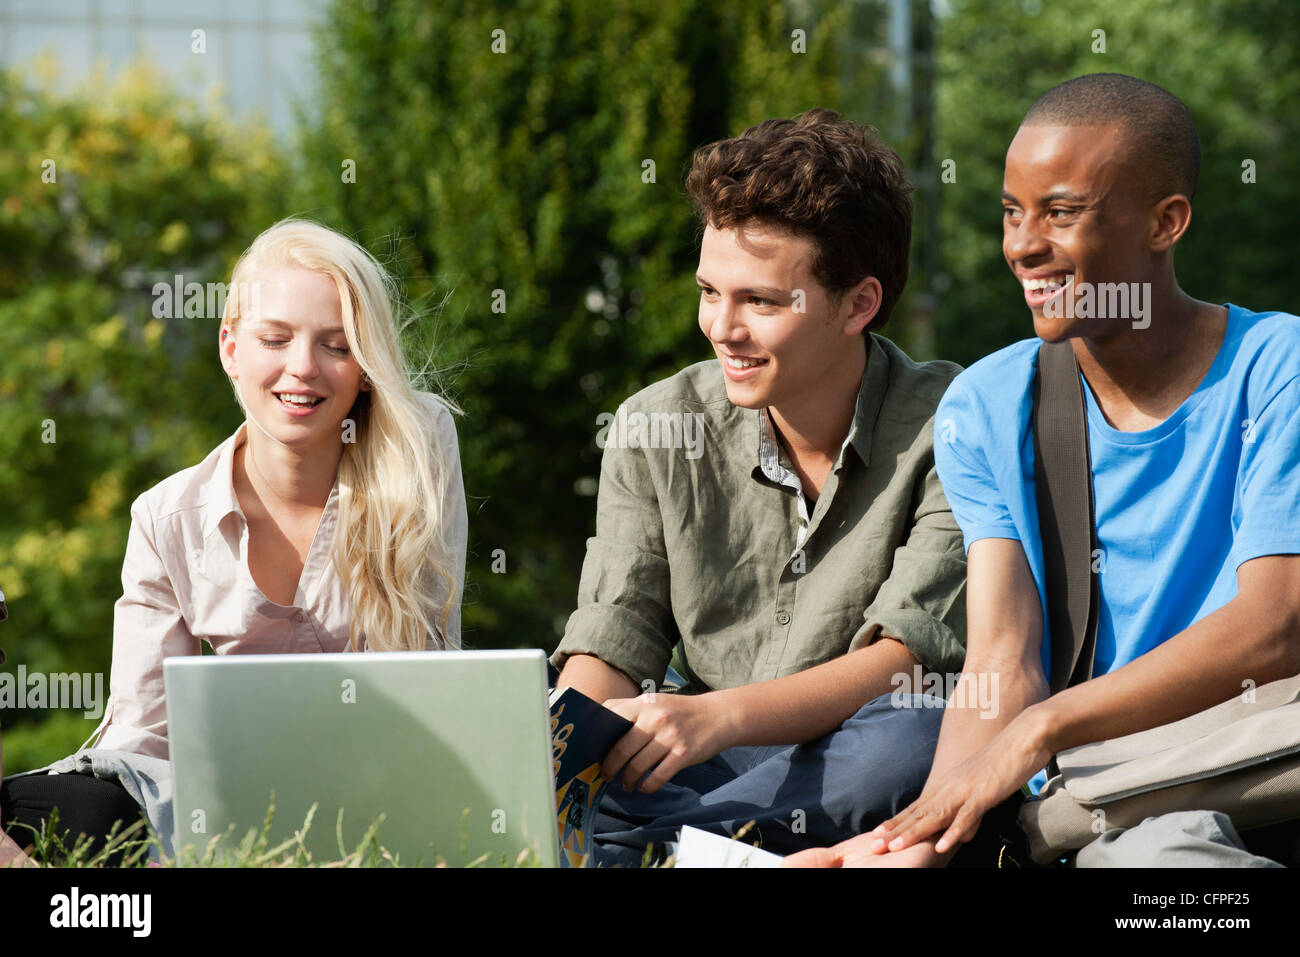 University students spending time together outdoors Stock Photo